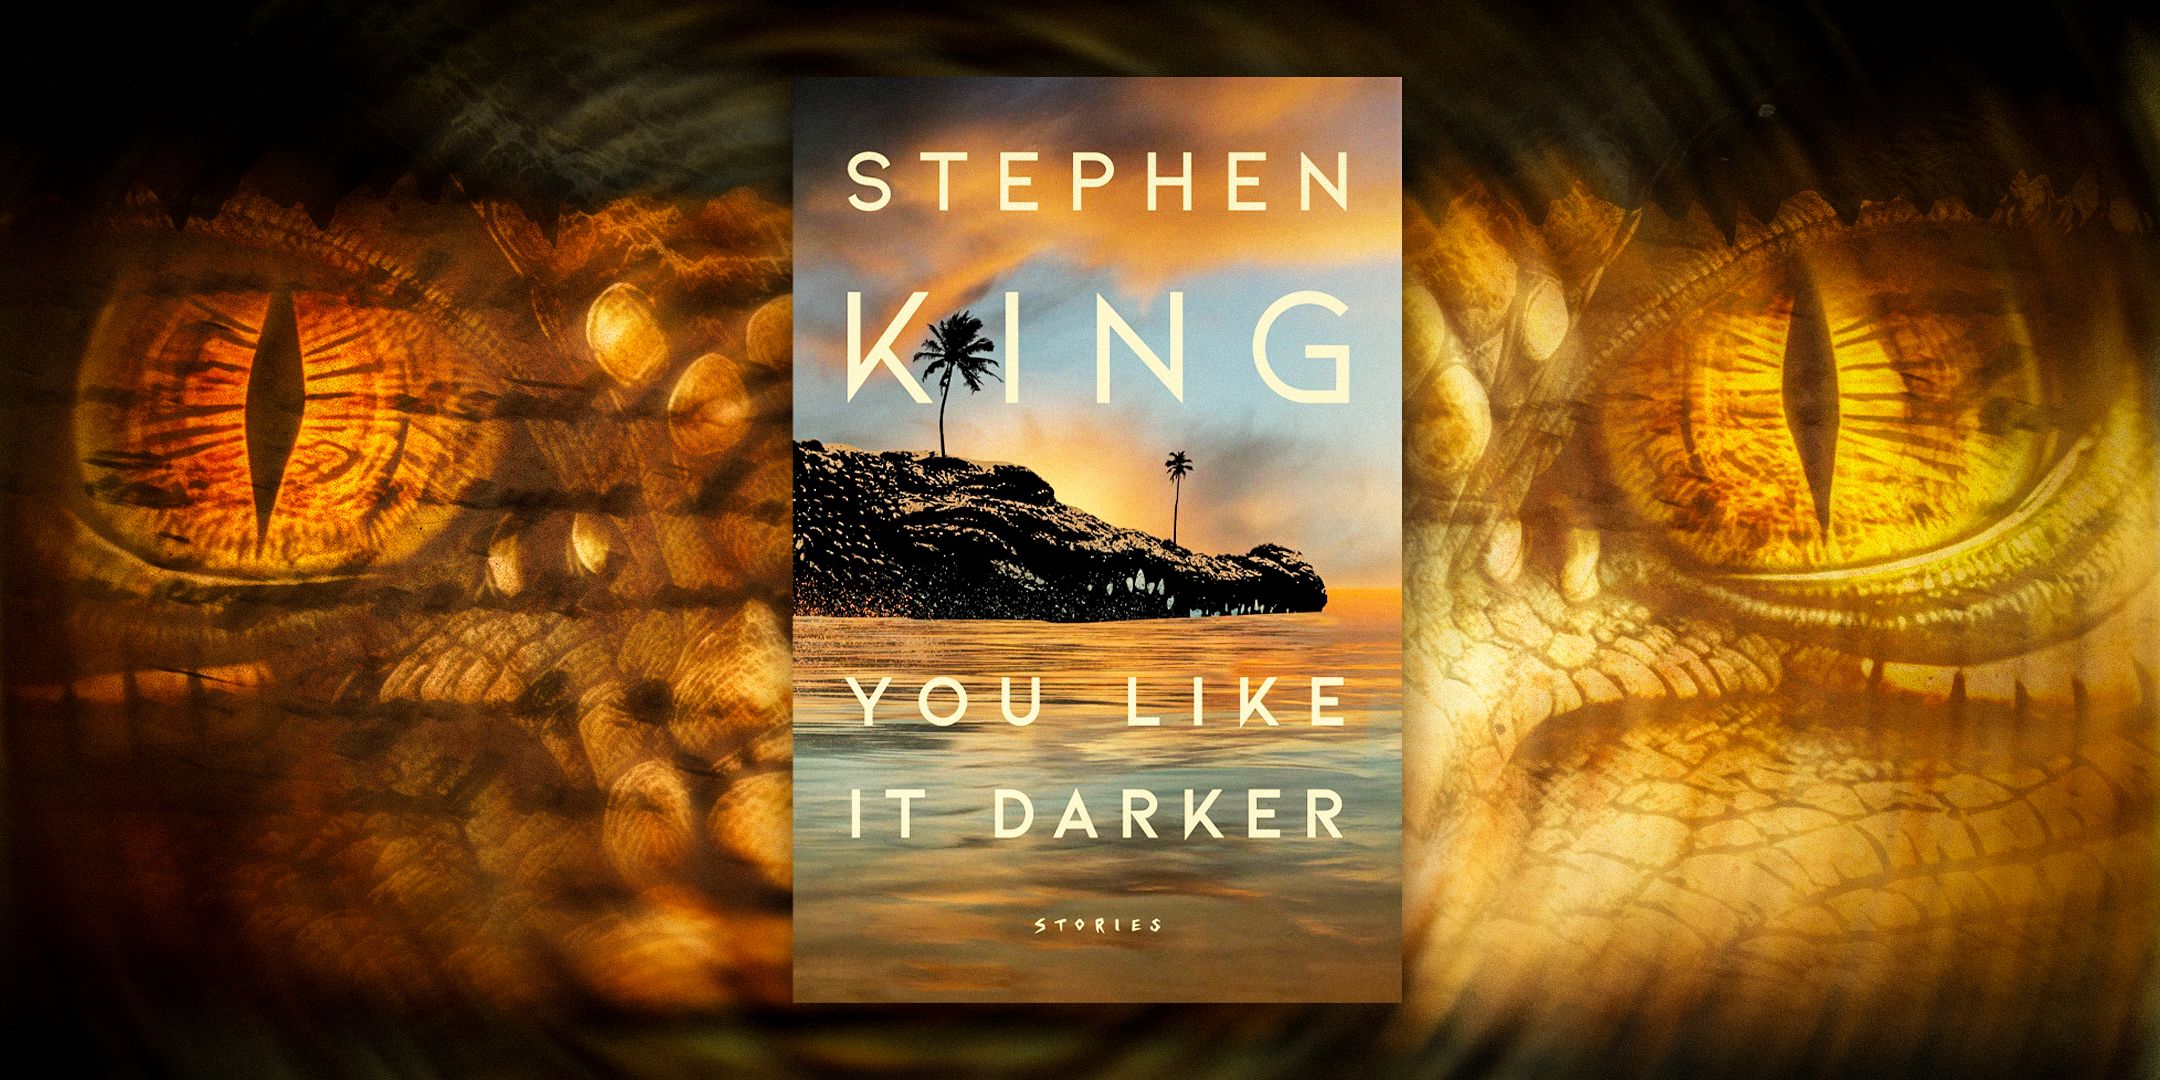 All Short Stories In Stephen King's You Like It Darker Book, Ranked 